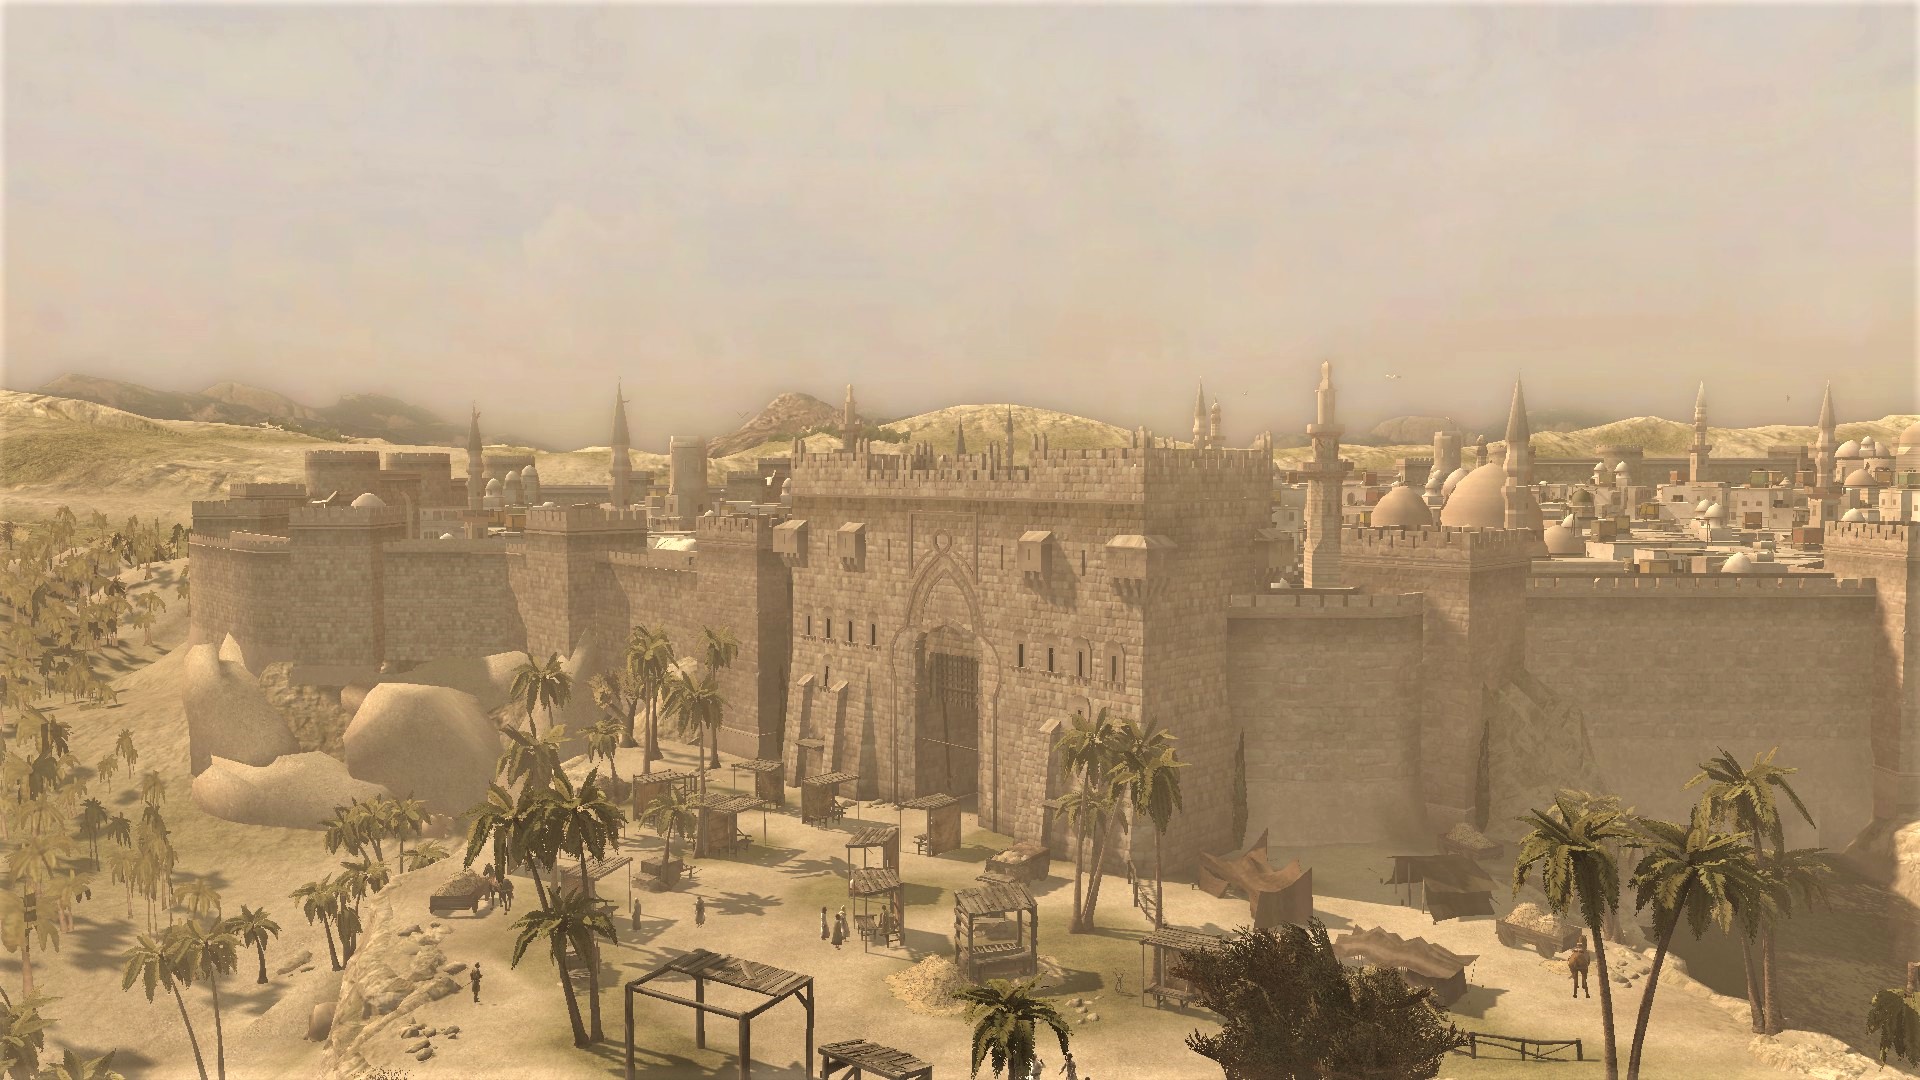 Damascus by Assassin's Creeed...